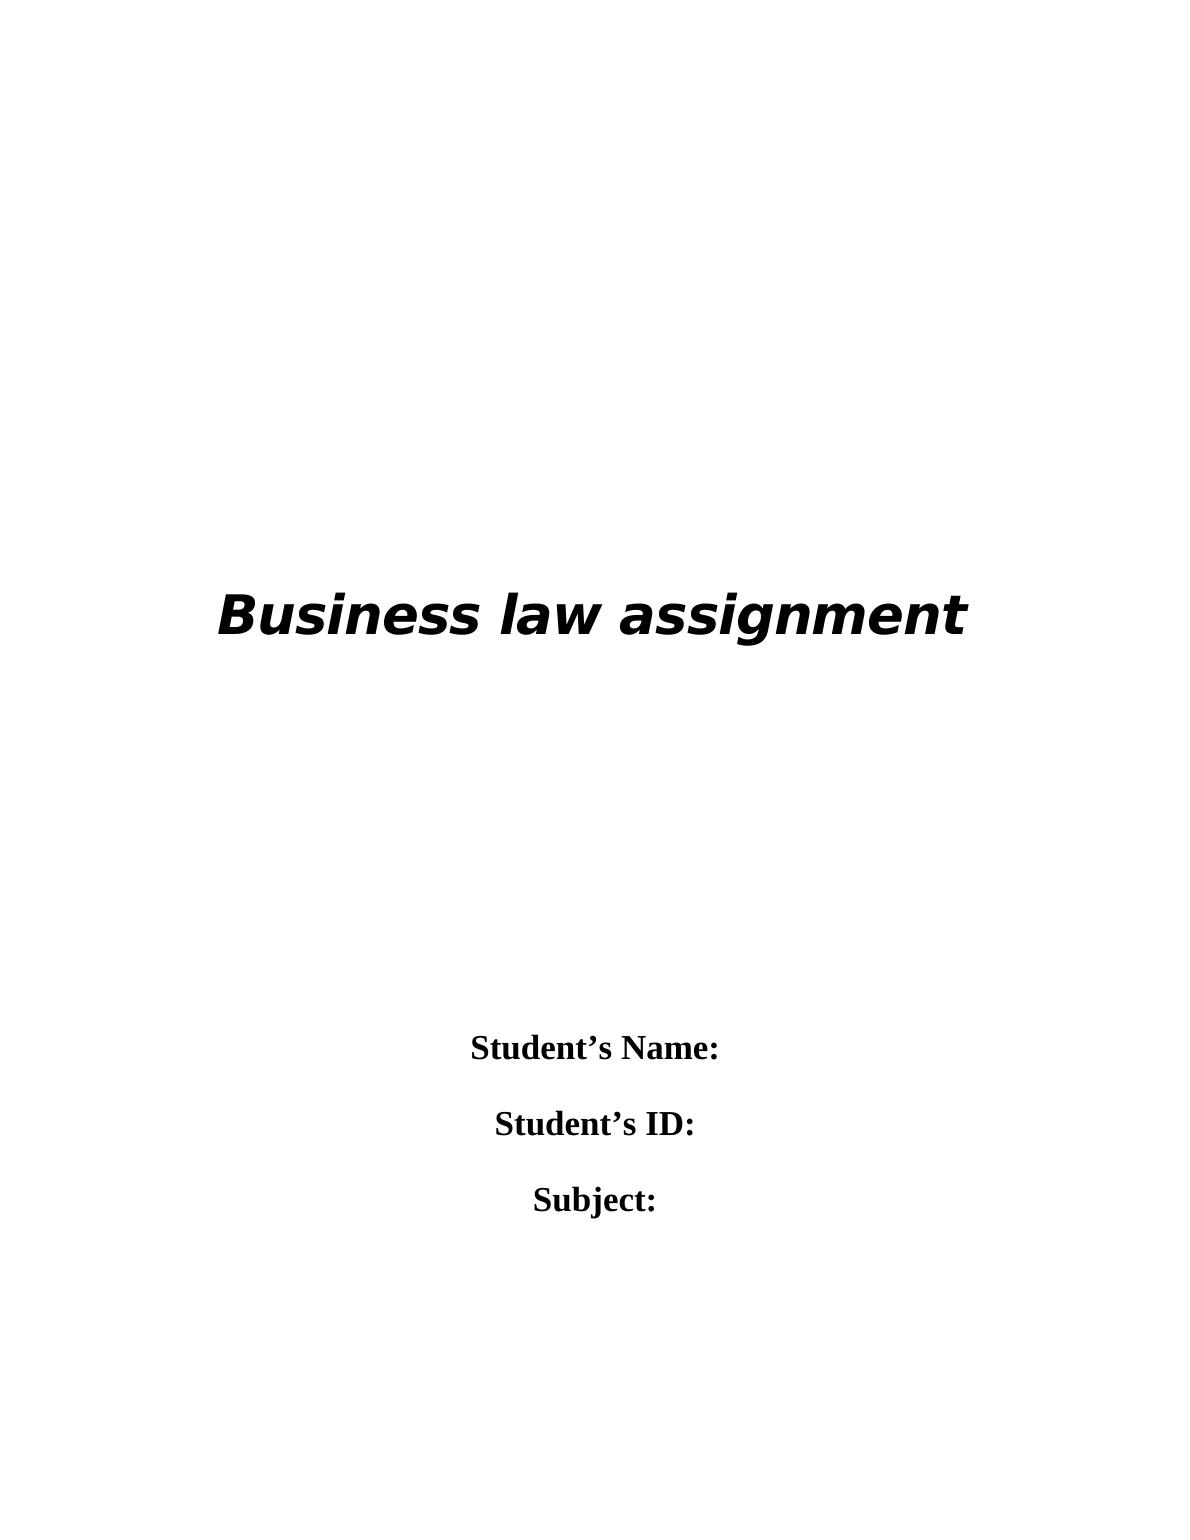 assignment for business law